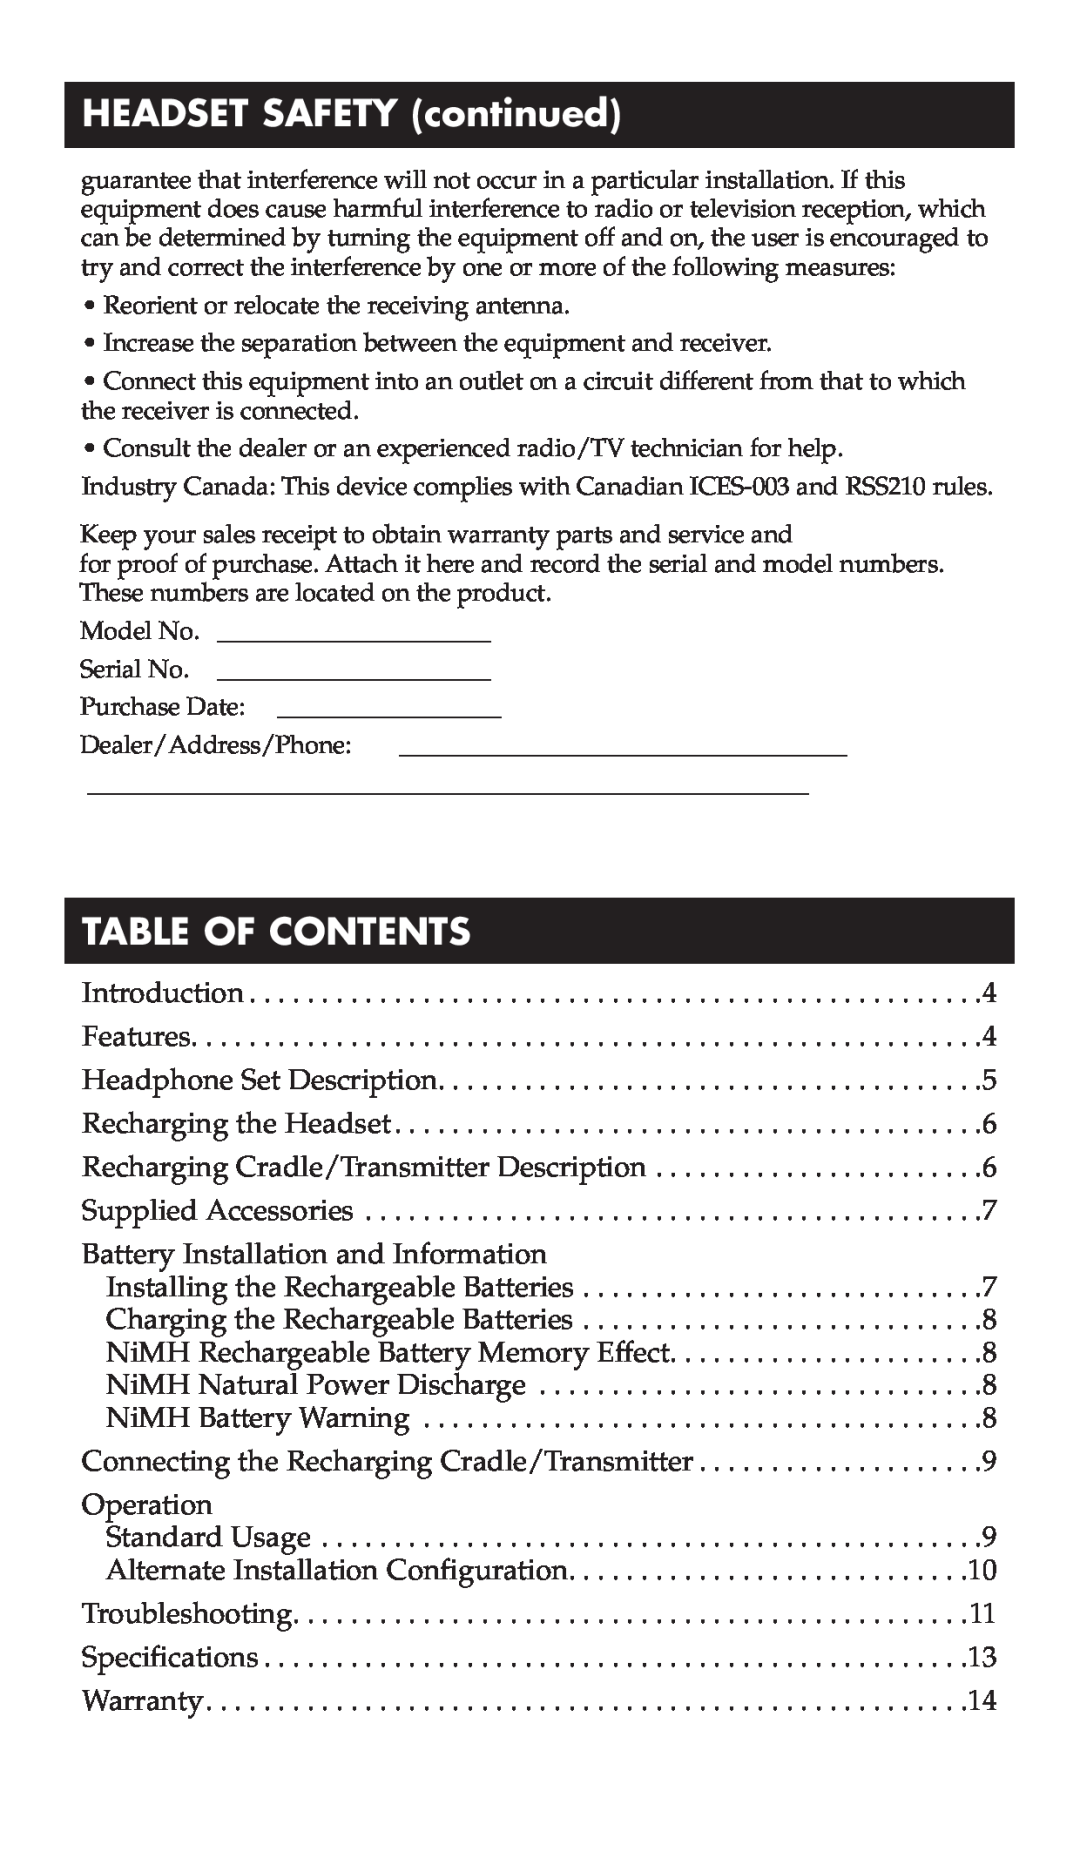 RCA WHP170, WHP175 manual HEADSET SAFETY continued, Table Of Contents 